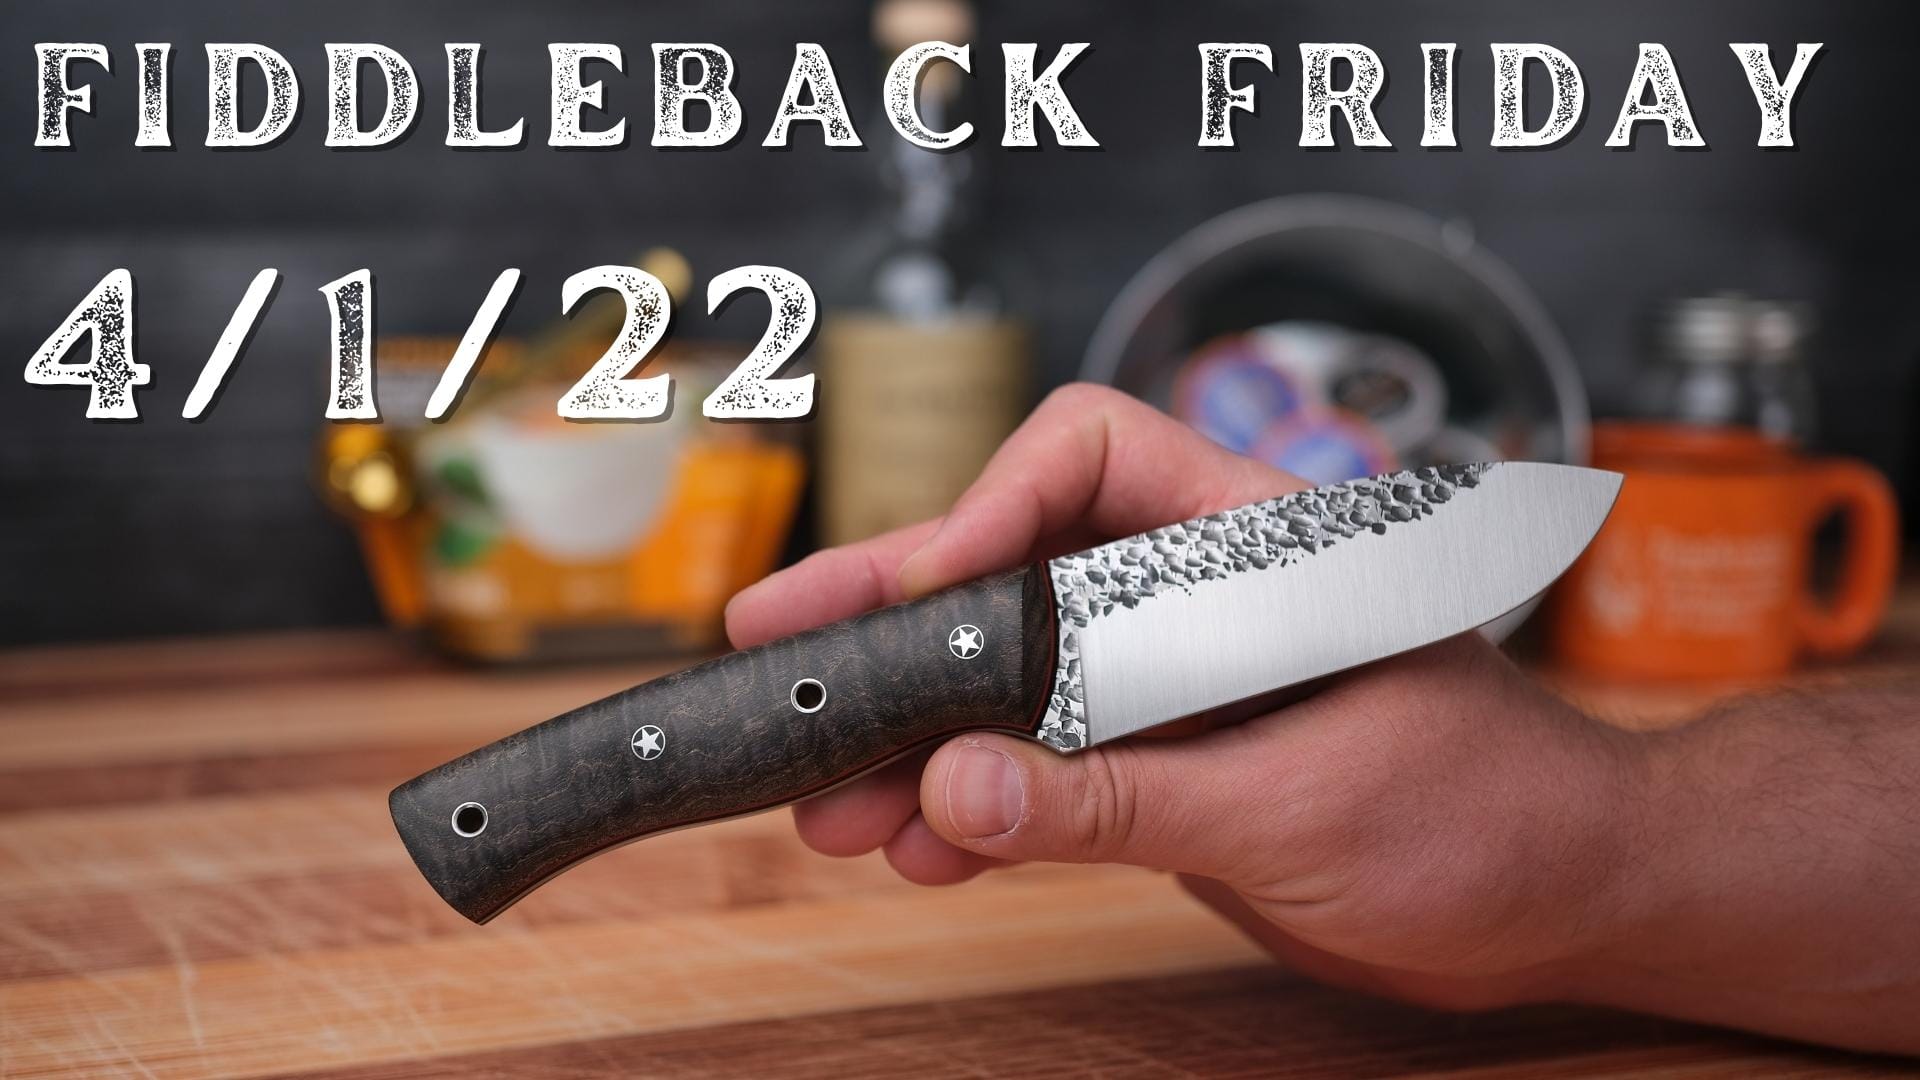 Fiddleback Friday 4/1/22 - Video Preview